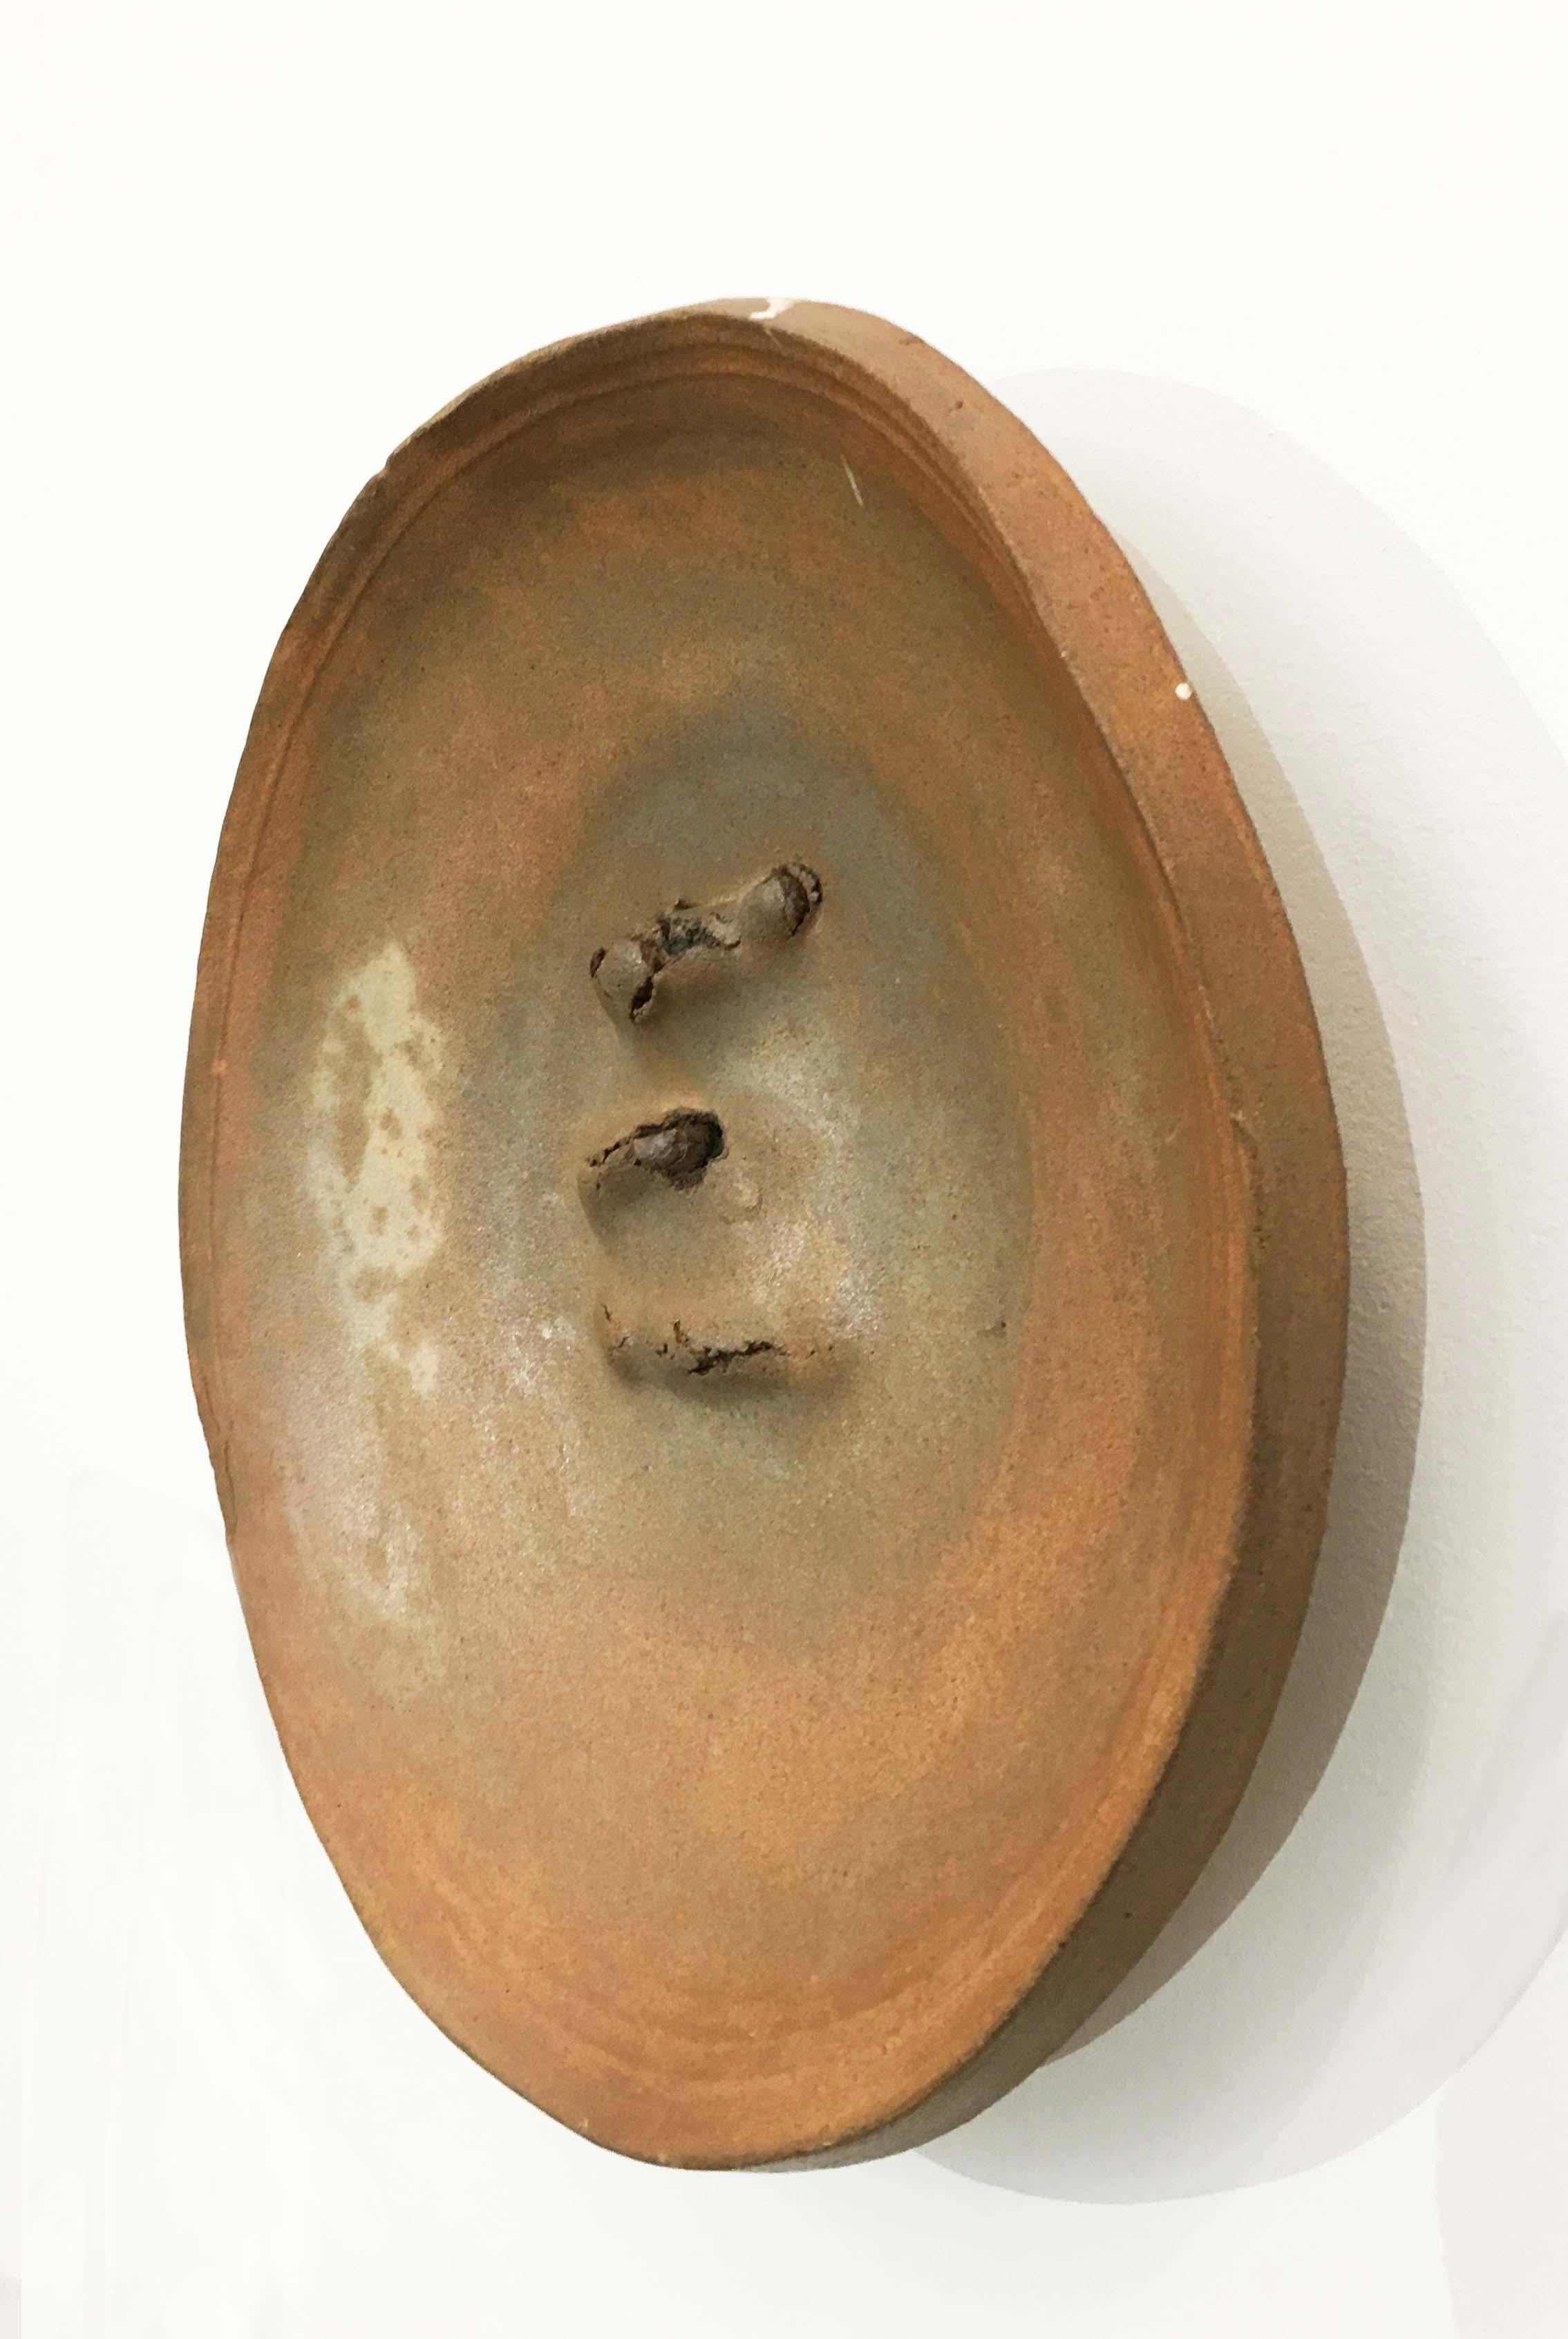 Untitled Gas-Fired Ceramic Plate (California Clay / American Clay Revolution) - Sculpture by Peter Voulkos